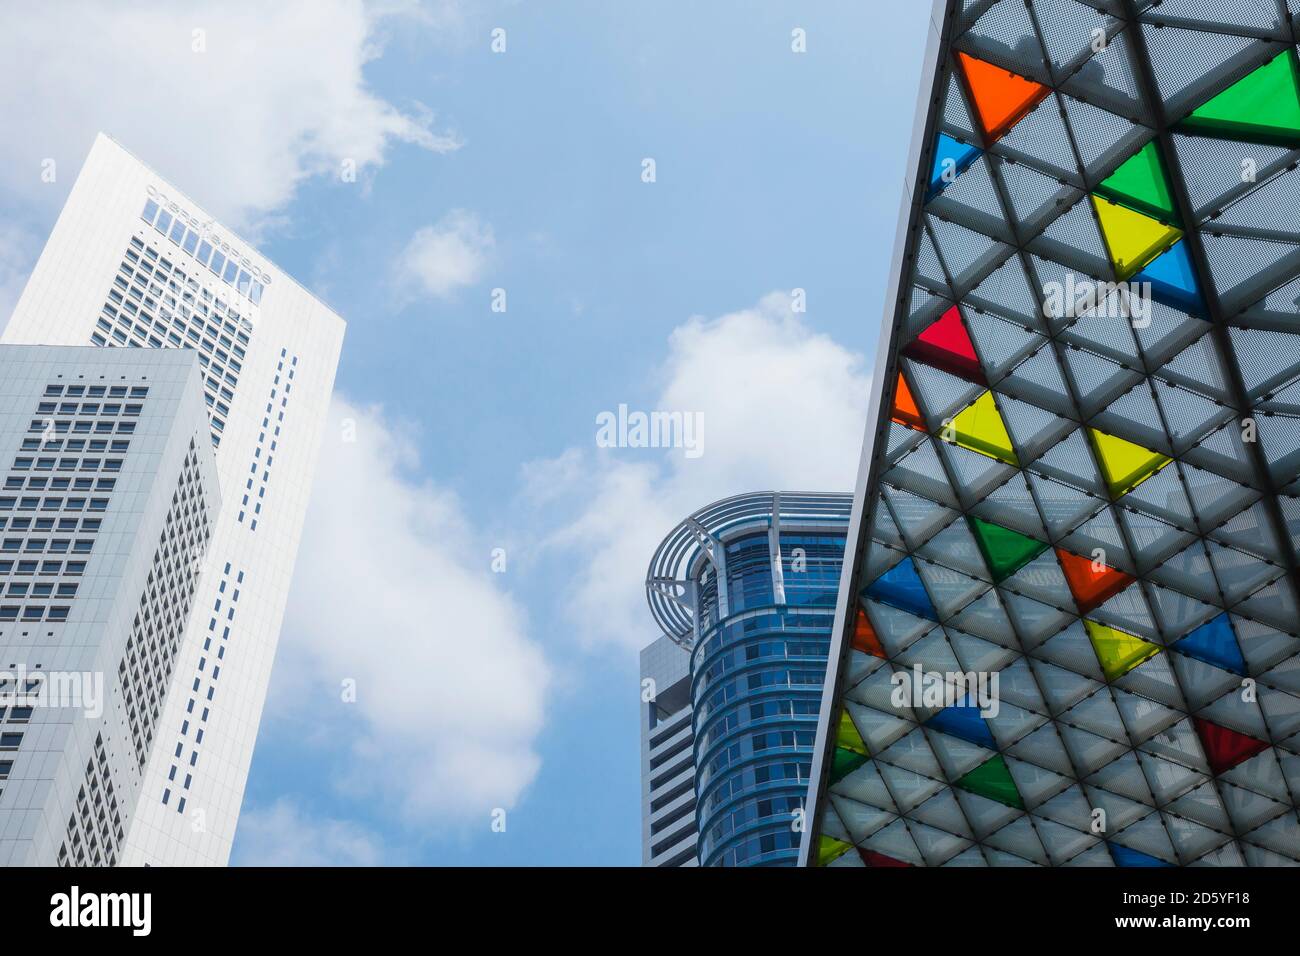 Asia, Singapore, Central Business District, Raffles Place, skyscrapers Stock Photo